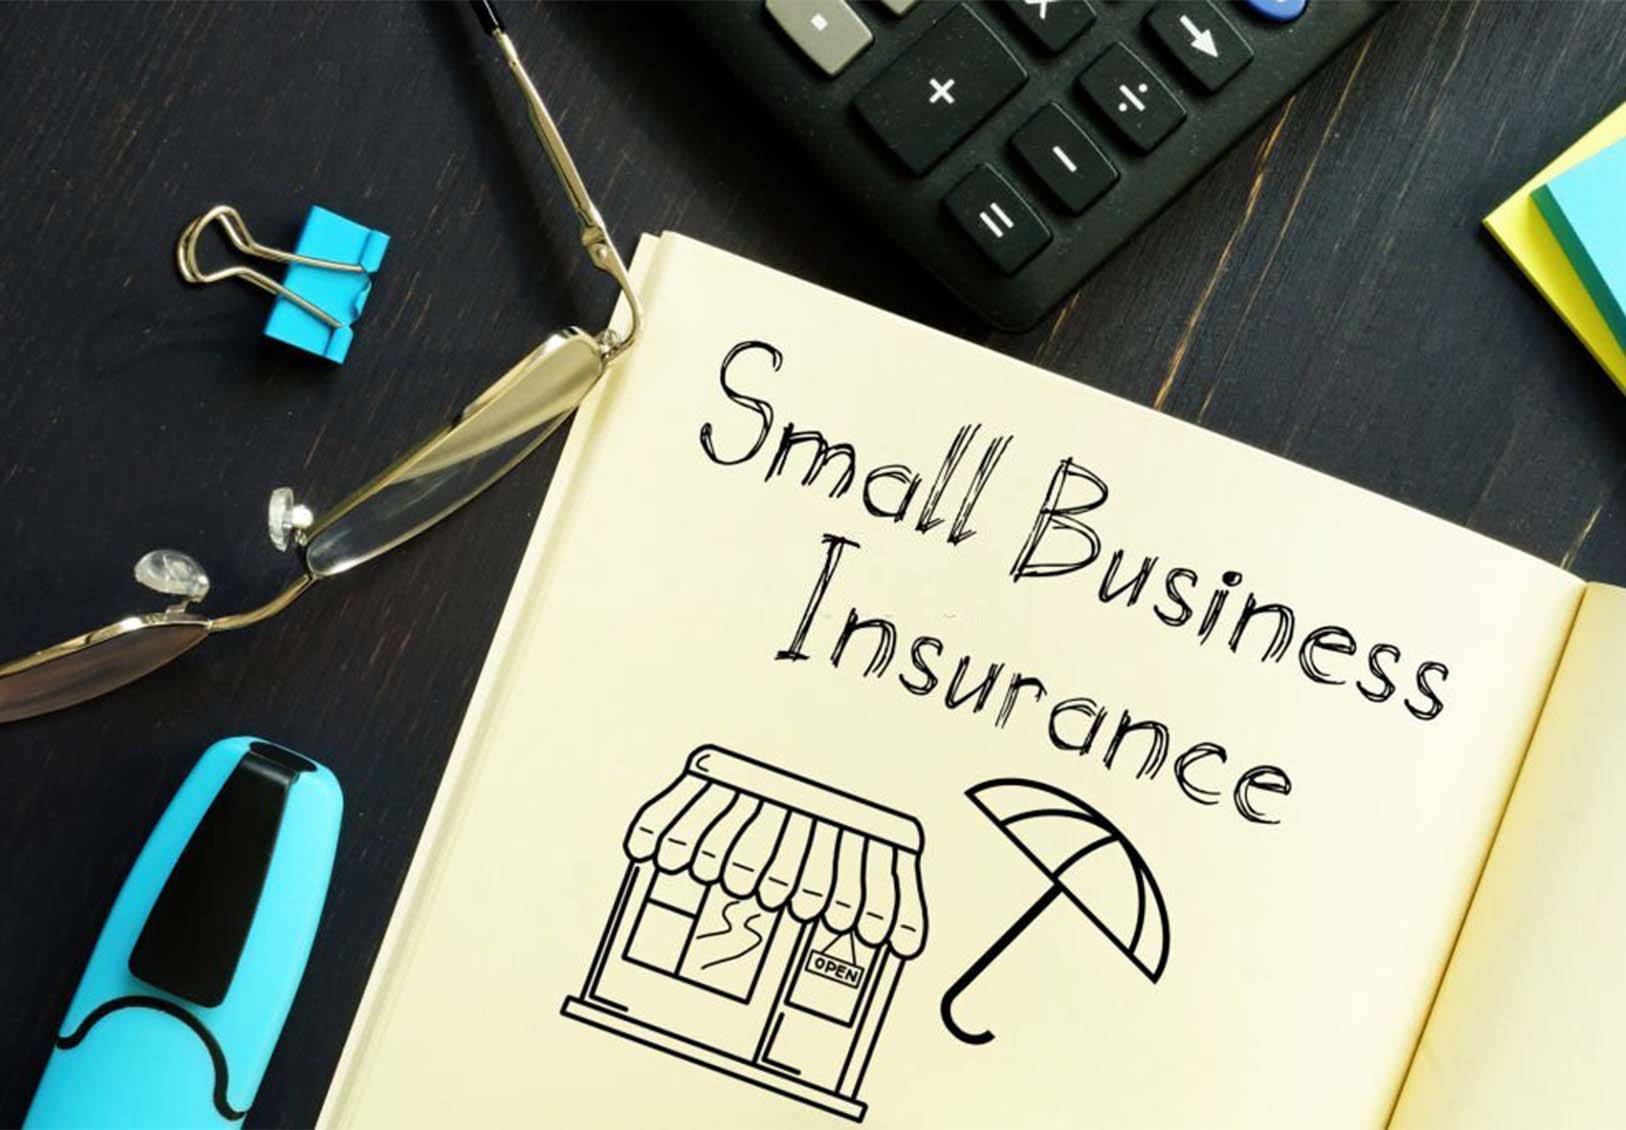 Insurance for Small Business - Protecting Your Venture